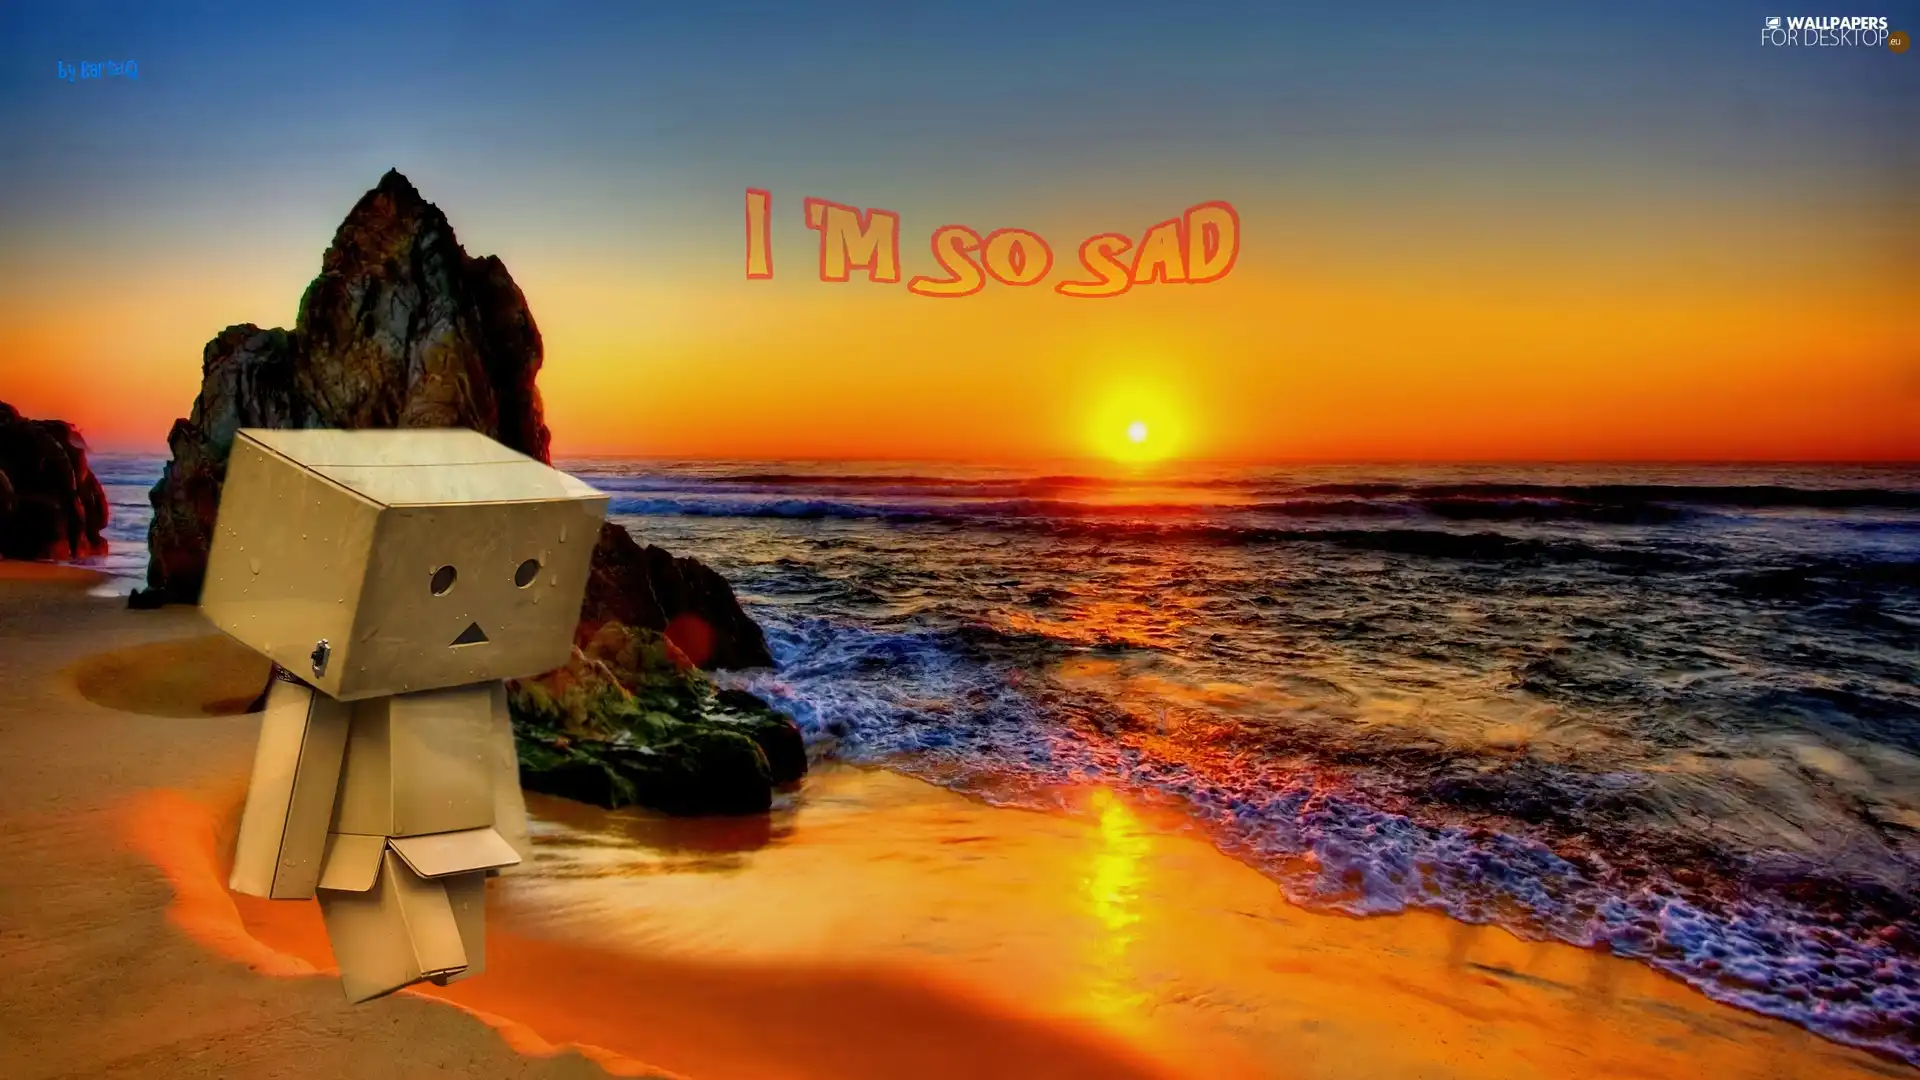 Great Sunsets, Danbo, Beaches